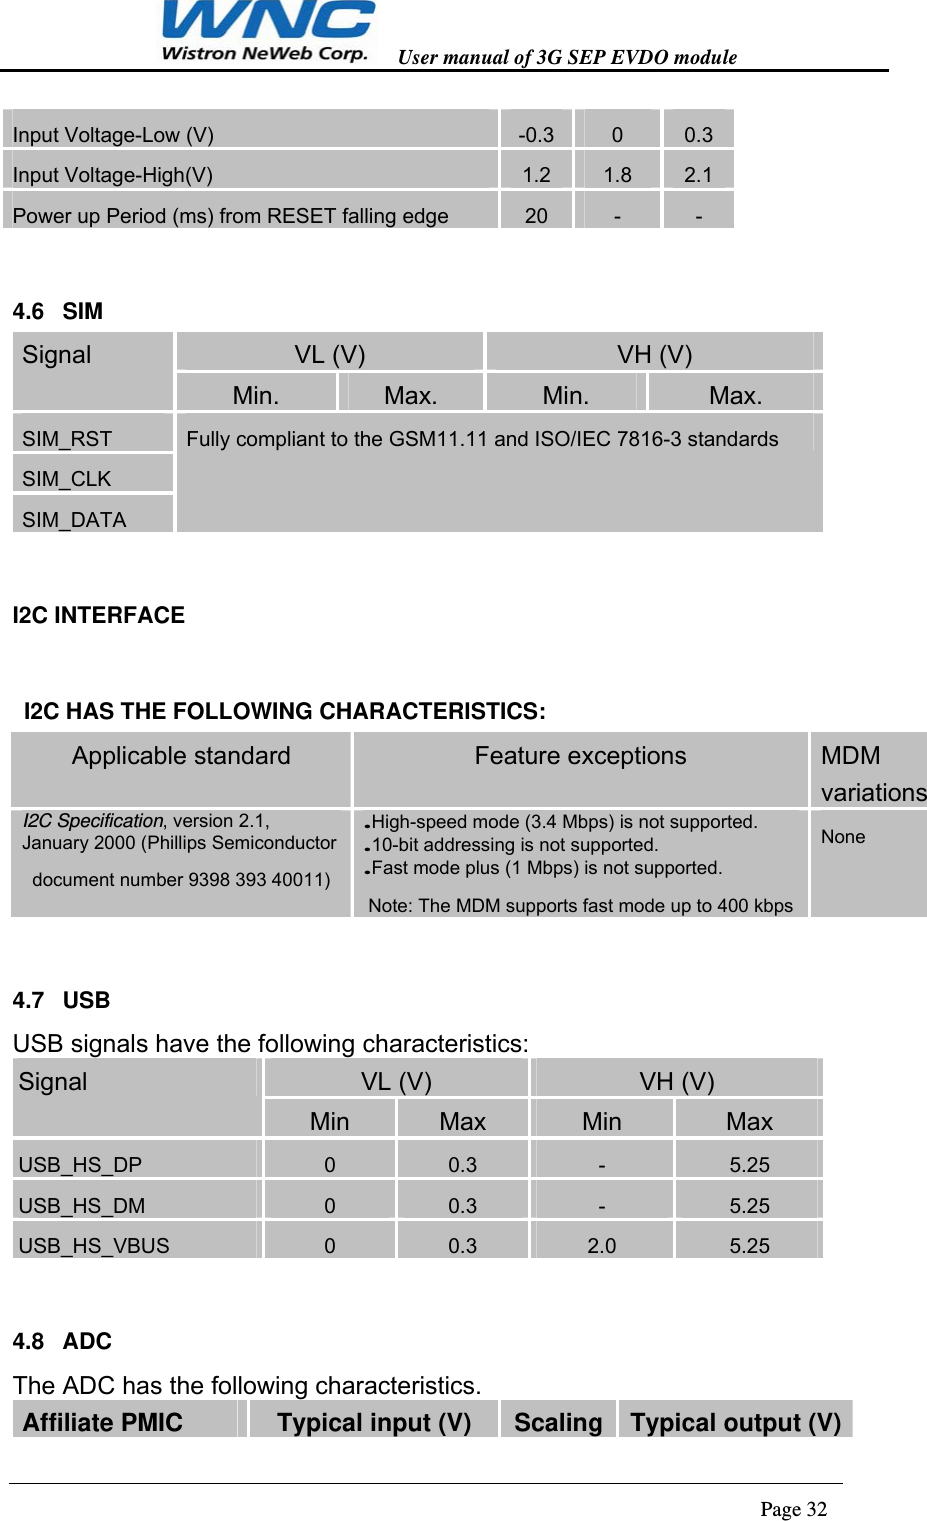   User manual of 3G SEP EVDO module                                                                      Page 32  Input Voltage-Low (V)  -0.3 0  0.3 Input Voltage-High(V)  1.2  1.8  2.1 Power up Period (ms) from RESET falling edge  20  -  - 4.6 SIM Signal  VL (V)  VH (V) Min.  Max.  Min.  Max. SIM_RST  Fully compliant to the GSM11.11 and ISO/IEC 7816-3 standards SIM_CLK SIM_DATA I2C INTERFACE   I2C HAS THE FOLLOWING CHARACTERISTICS:   Applicable standard  Feature exceptions  MDM variations I2C Specification, version 2.1, January 2000 (Phillips Semiconductor document number 9398 393 40011) .High-speed mode (3.4 Mbps) is not supported. .10-bit addressing is not supported. .Fast mode plus (1 Mbps) is not supported. Note: The MDM supports fast mode up to 400 kbps None 4.7 USB USB signals have the following characteristics: Signal  VL (V)  VH (V) Min  Max  Min  Max USB_HS_DP  0  0.3  -  5.25 USB_HS_DM  0  0.3  -  5.25 USB_HS_VBUS  0  0.3  2.0  5.25 4.8 ADC The ADC has the following characteristics.   Affiliate PMIC  Typical input (V) Scaling Typical output (V) 